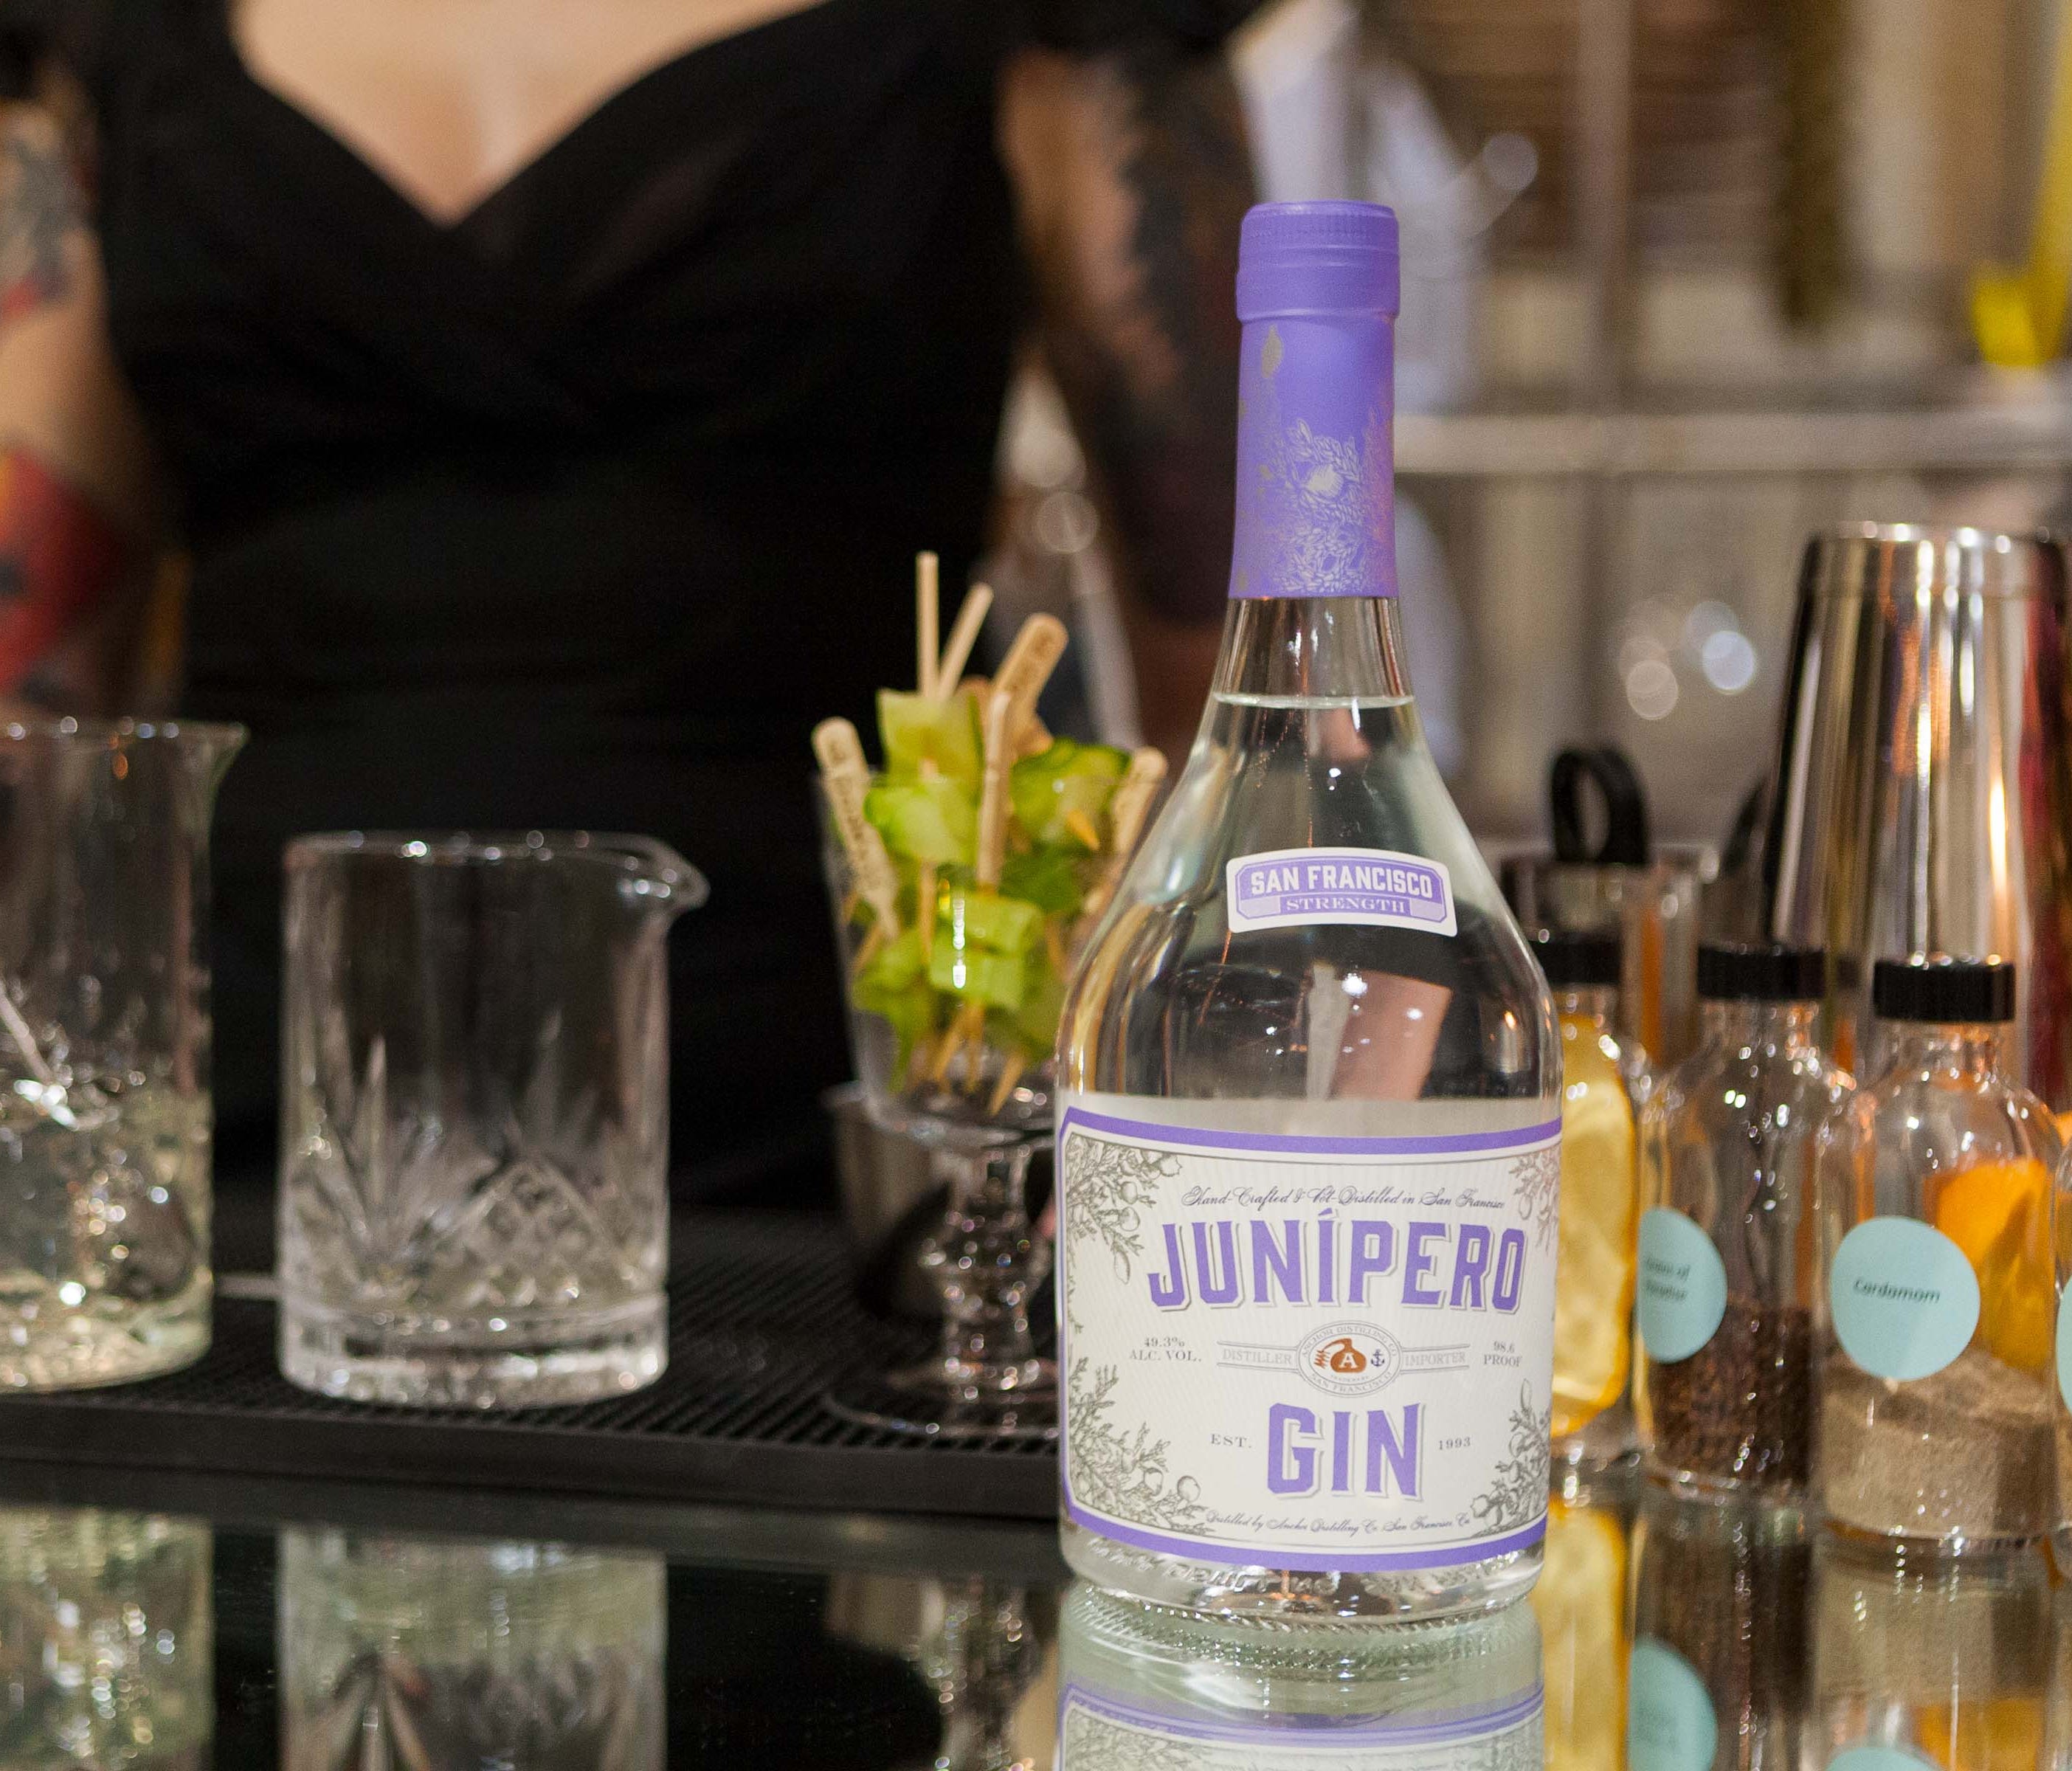 Junipero Gin was one of the first American craft gins and just celebrated its 20th anniversary. The high proof spirit comes in at 98.6 and utilizes botanicals including juniper, cassia bark, anise seed and grains of paradise.